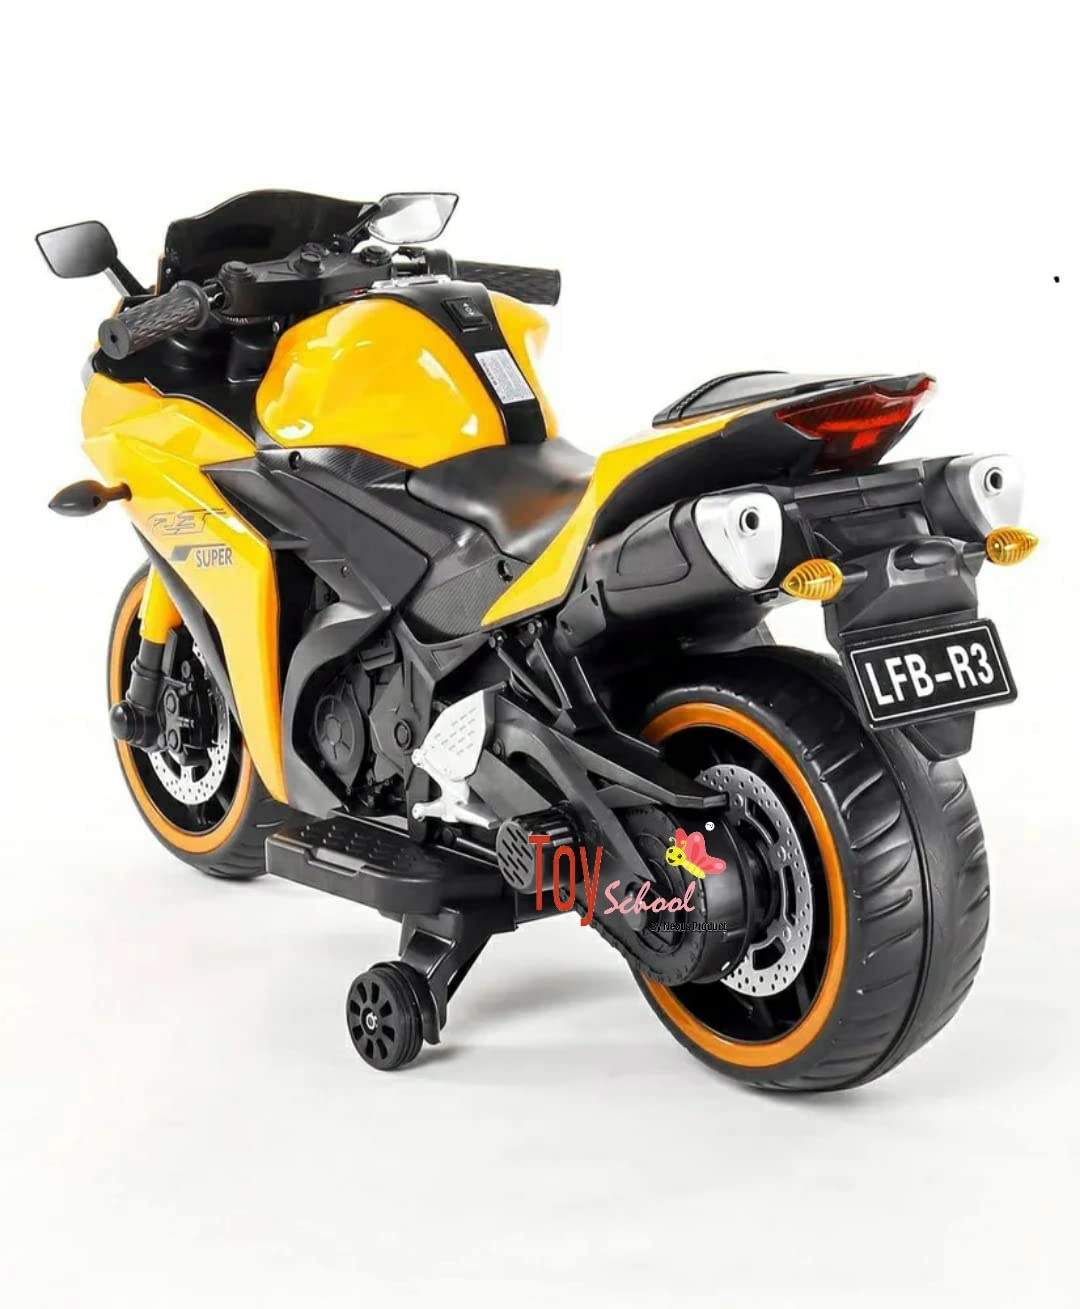 LetzrideKids Toy R3 Bike with Rechargeable Battery Operated Ride on for Boys and Girls | Electric Children Ride on [3 to 8 Years, Large, Red]… (Yellow)